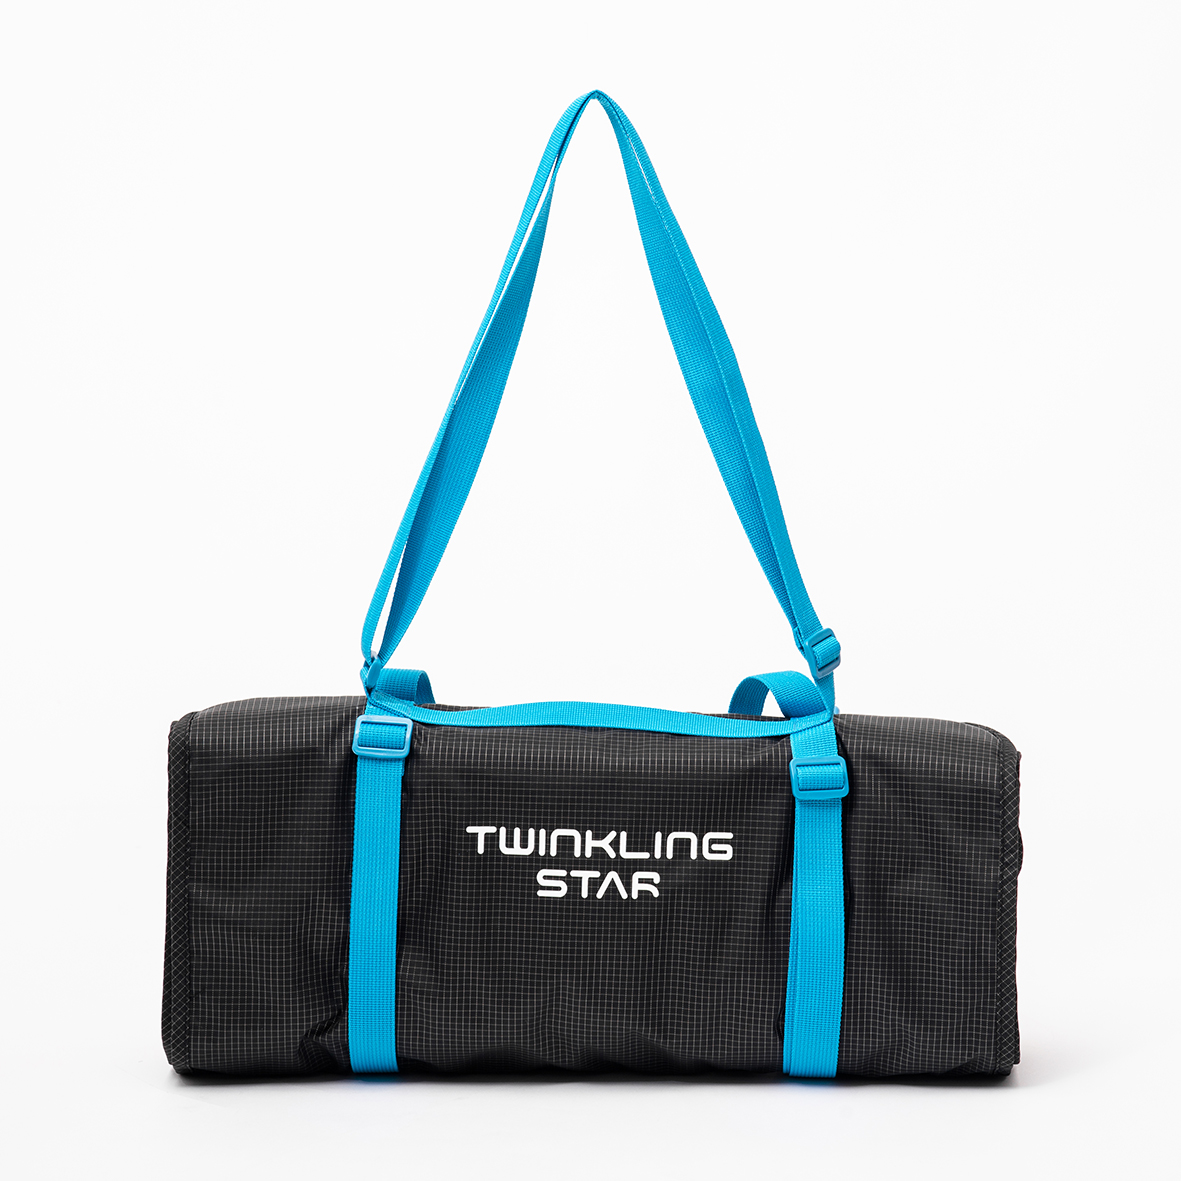 factory Outlets for Multicolor Gym Sports Bag Men - New design portable and stylish multi-compartment with large capacity rolled up travel bag large size – Twinkling Star